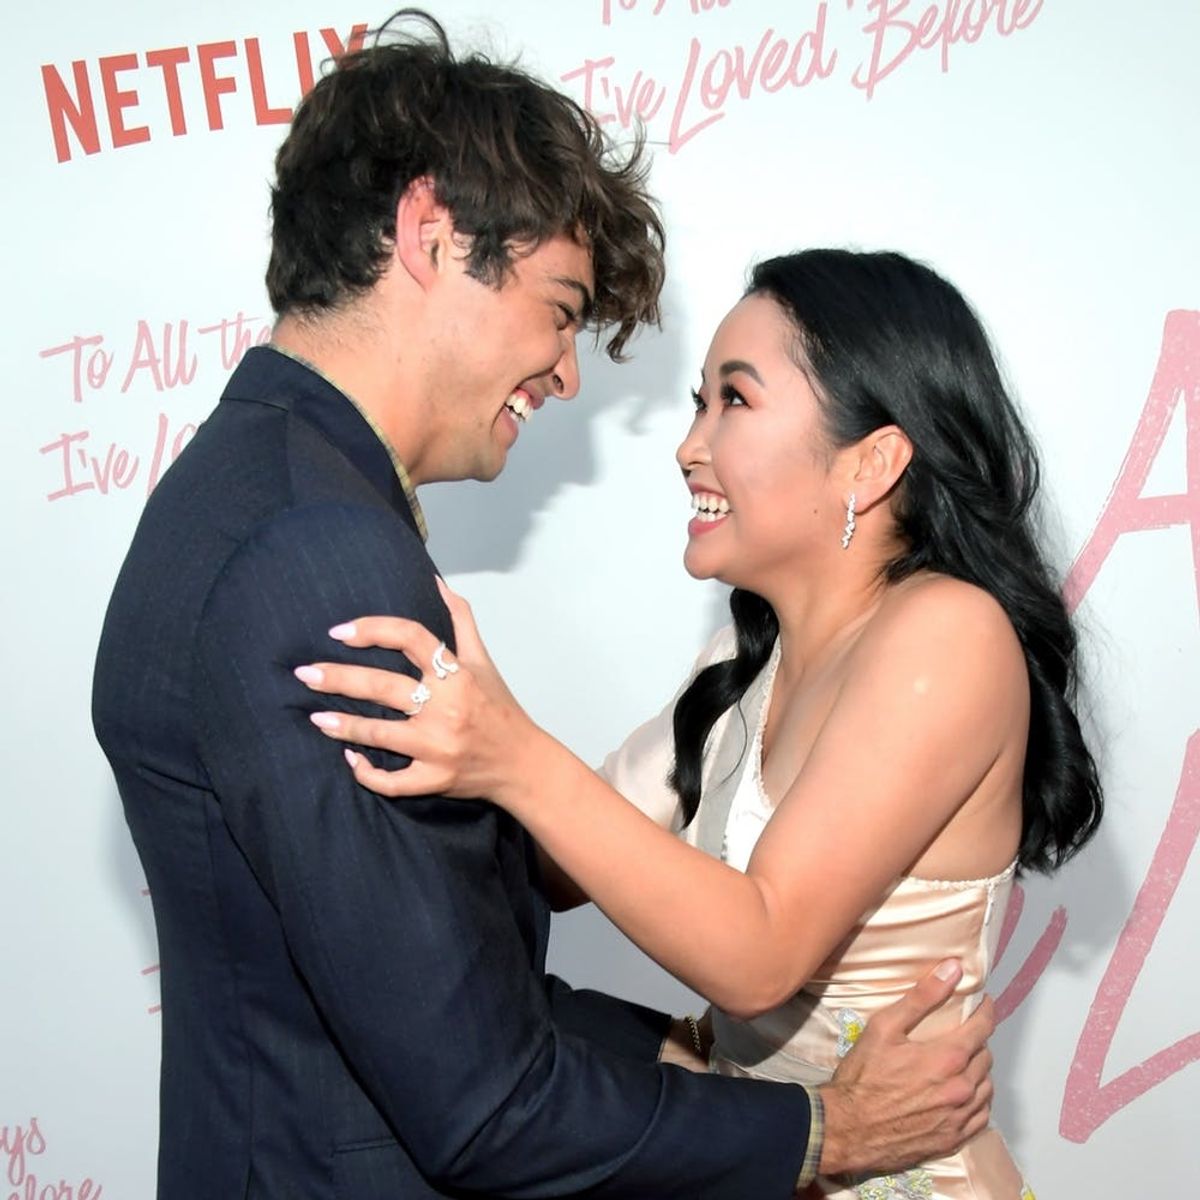 To All the Boys I’ve Loved Before’s Noah Centineo and Israel Broussard Flirt With Lana Condor in a Charm Battle